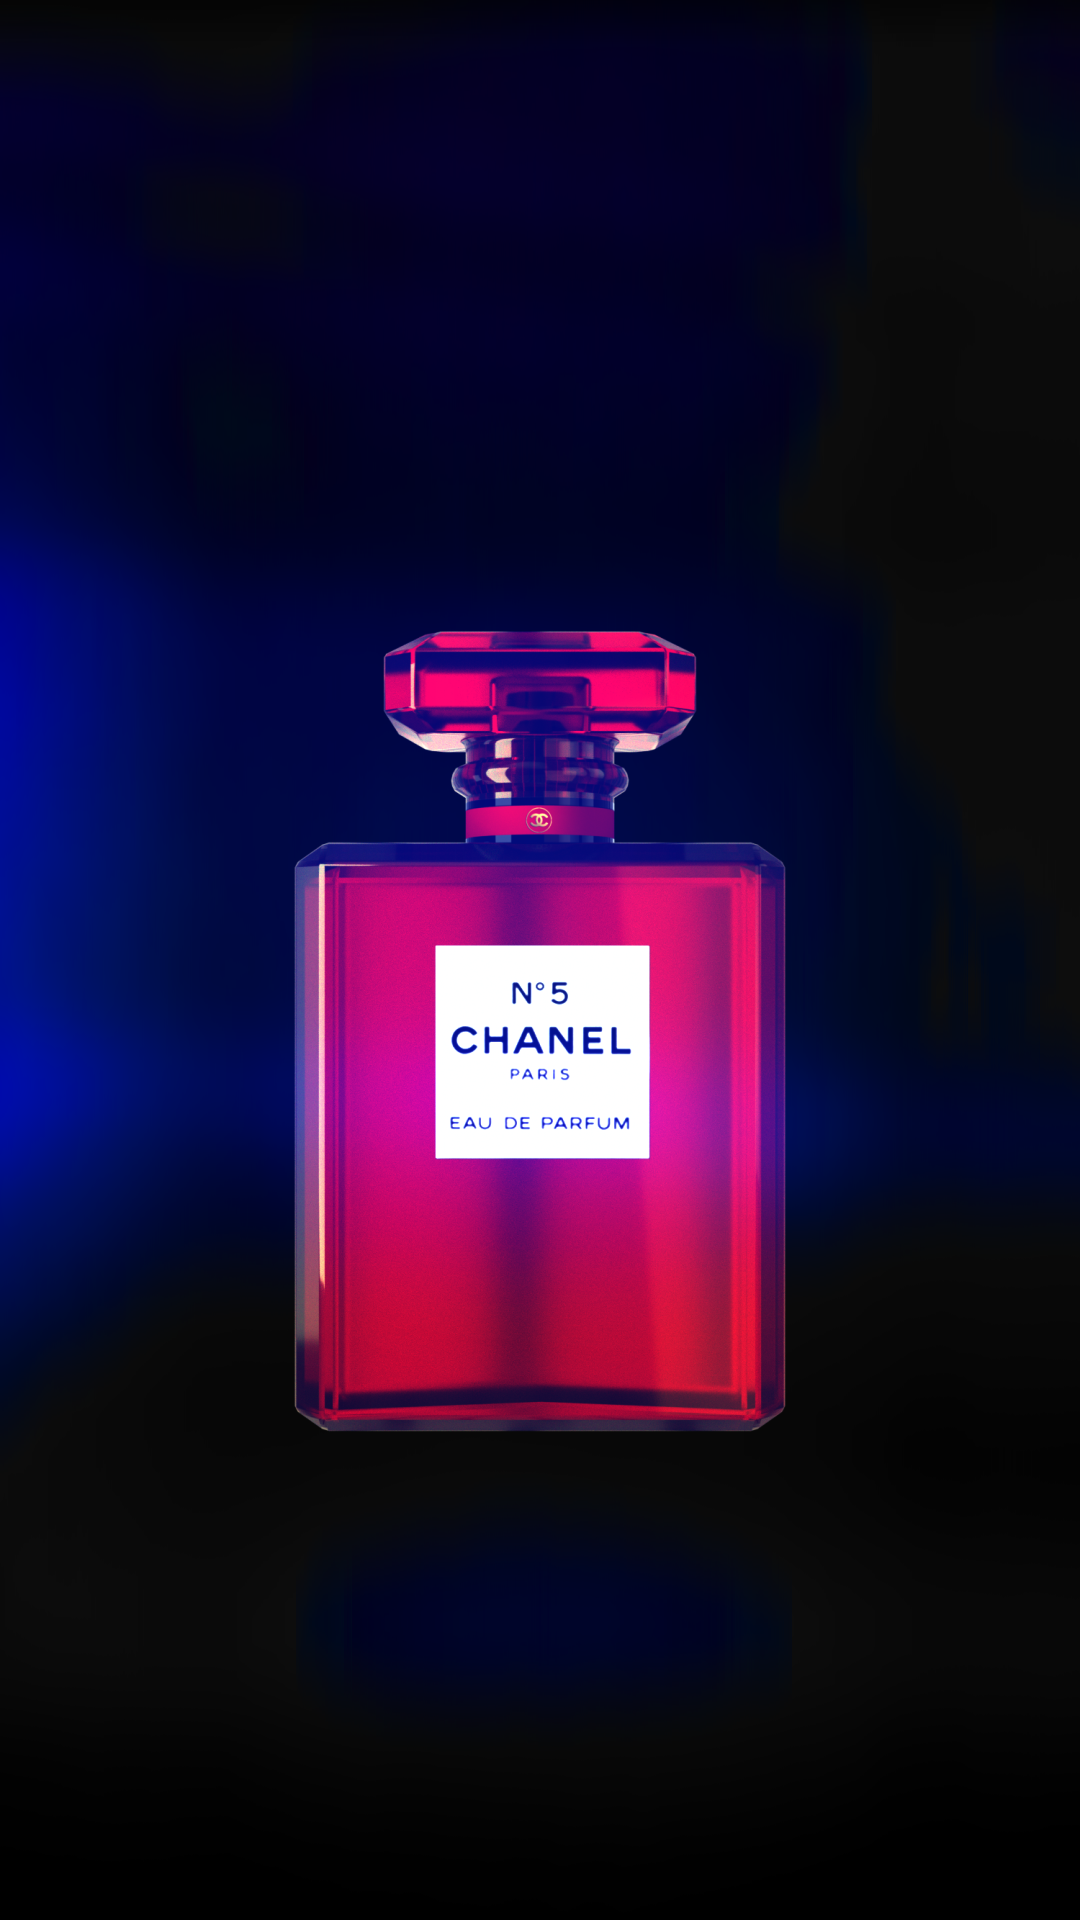 Chanel fragrance editorial stock photo. Image of color - 121469688